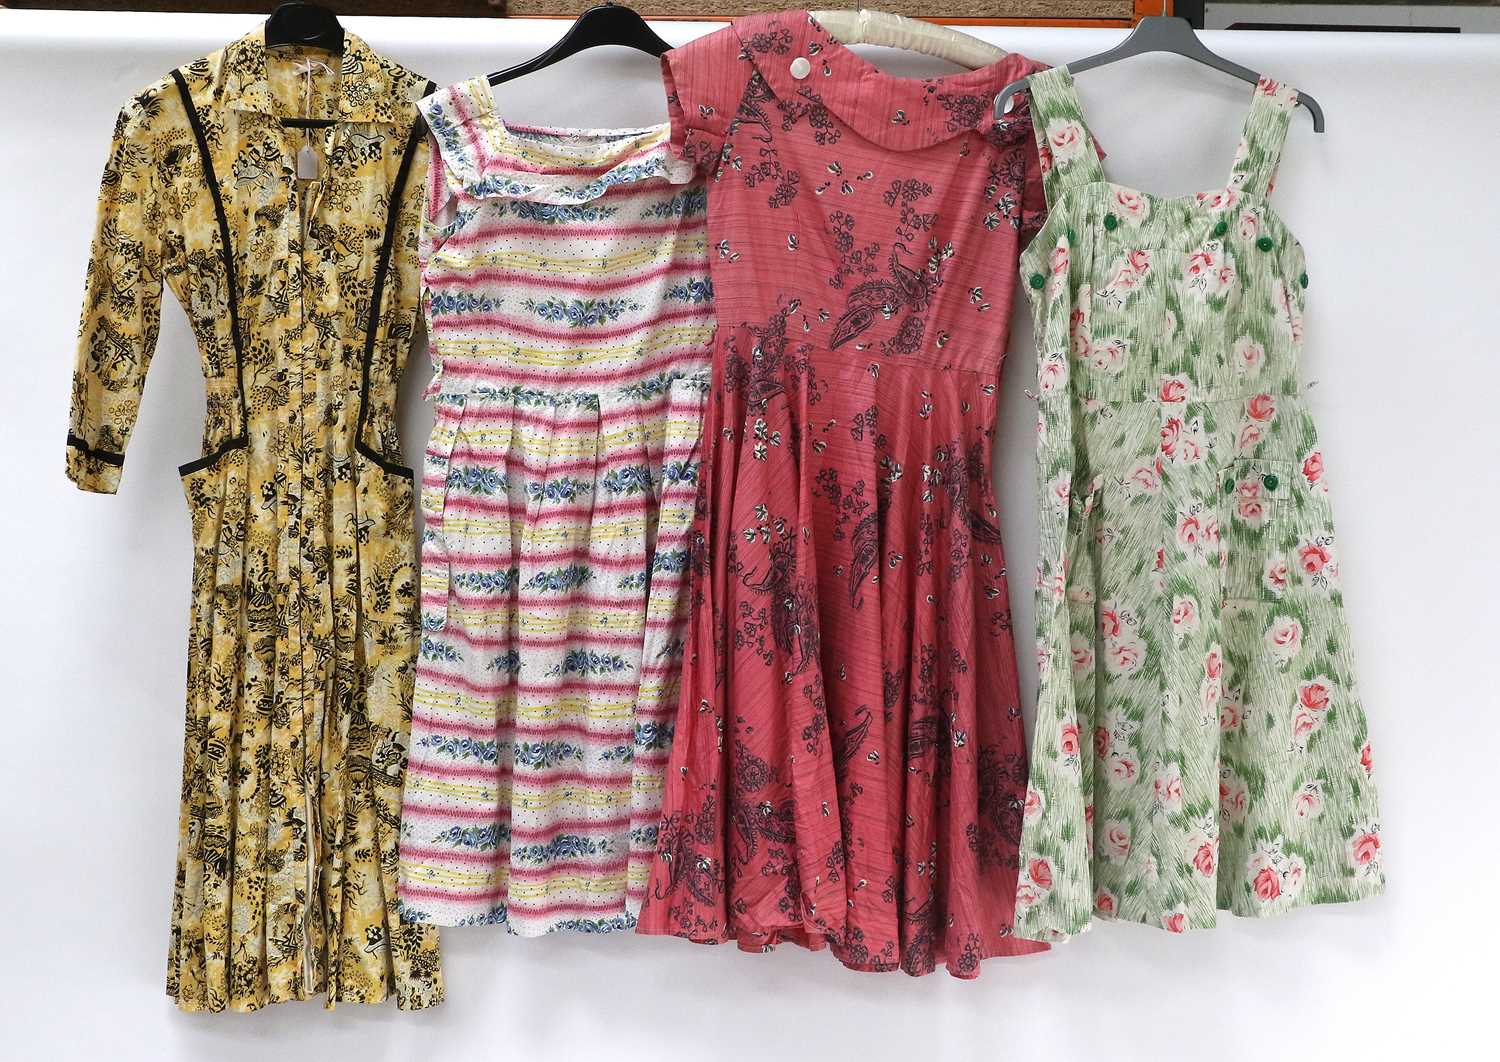 Circa 1950s and Later Printed Cotton Dresses, comprising California sleeveless dress printed with - Image 4 of 4